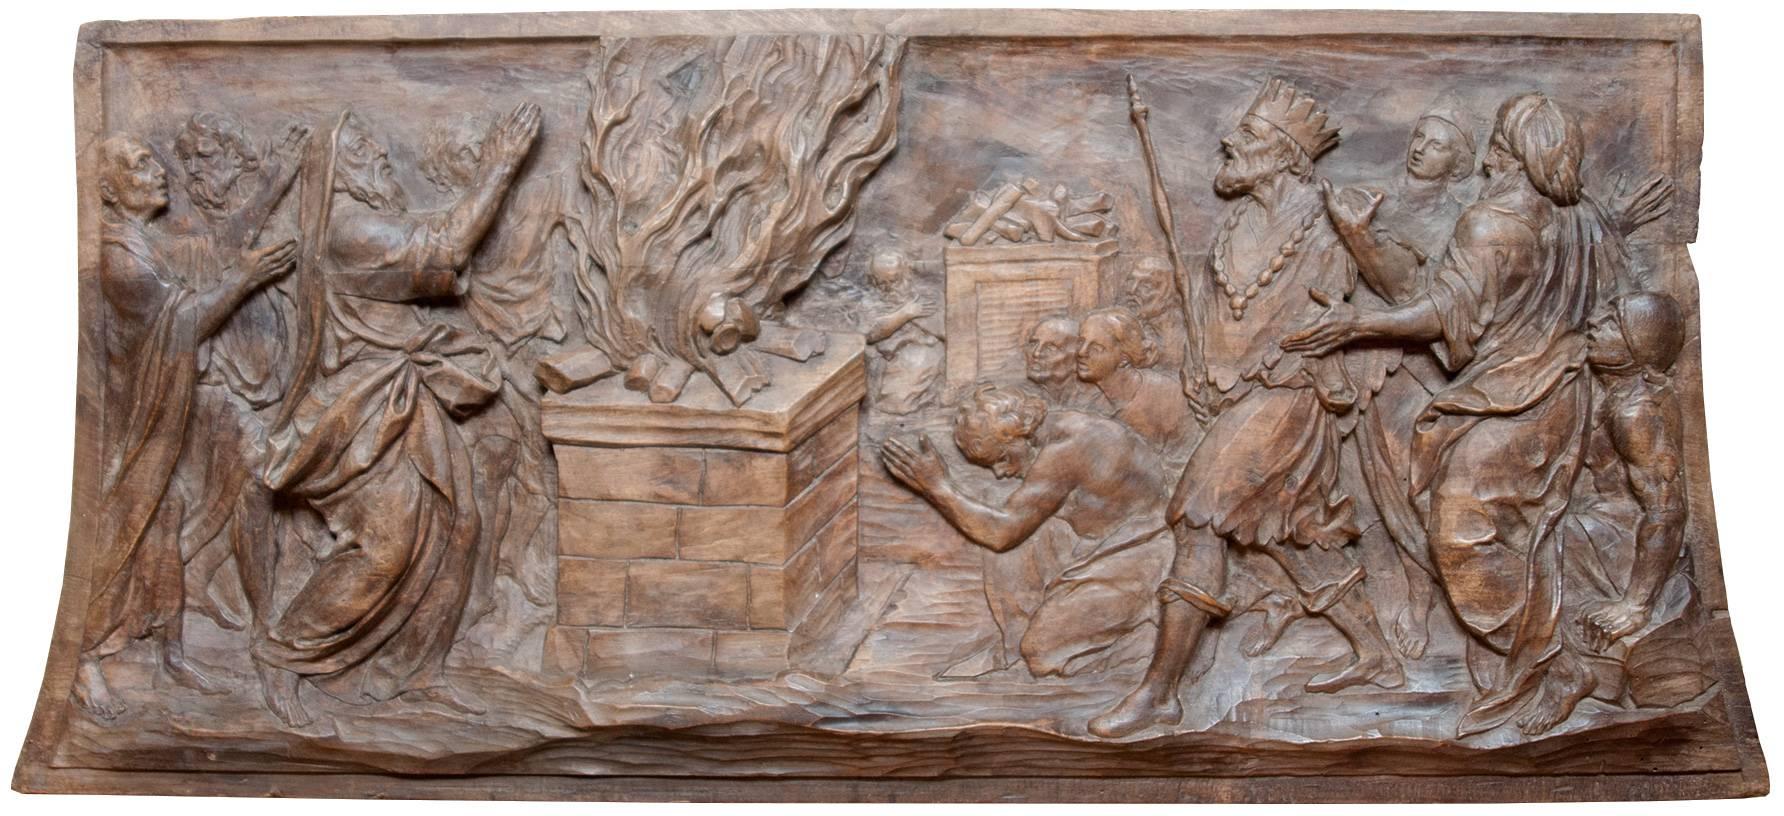 Unknown Figurative Sculpture - Relief depicting Elijah and Ahab at Mount Carmel c. 1700